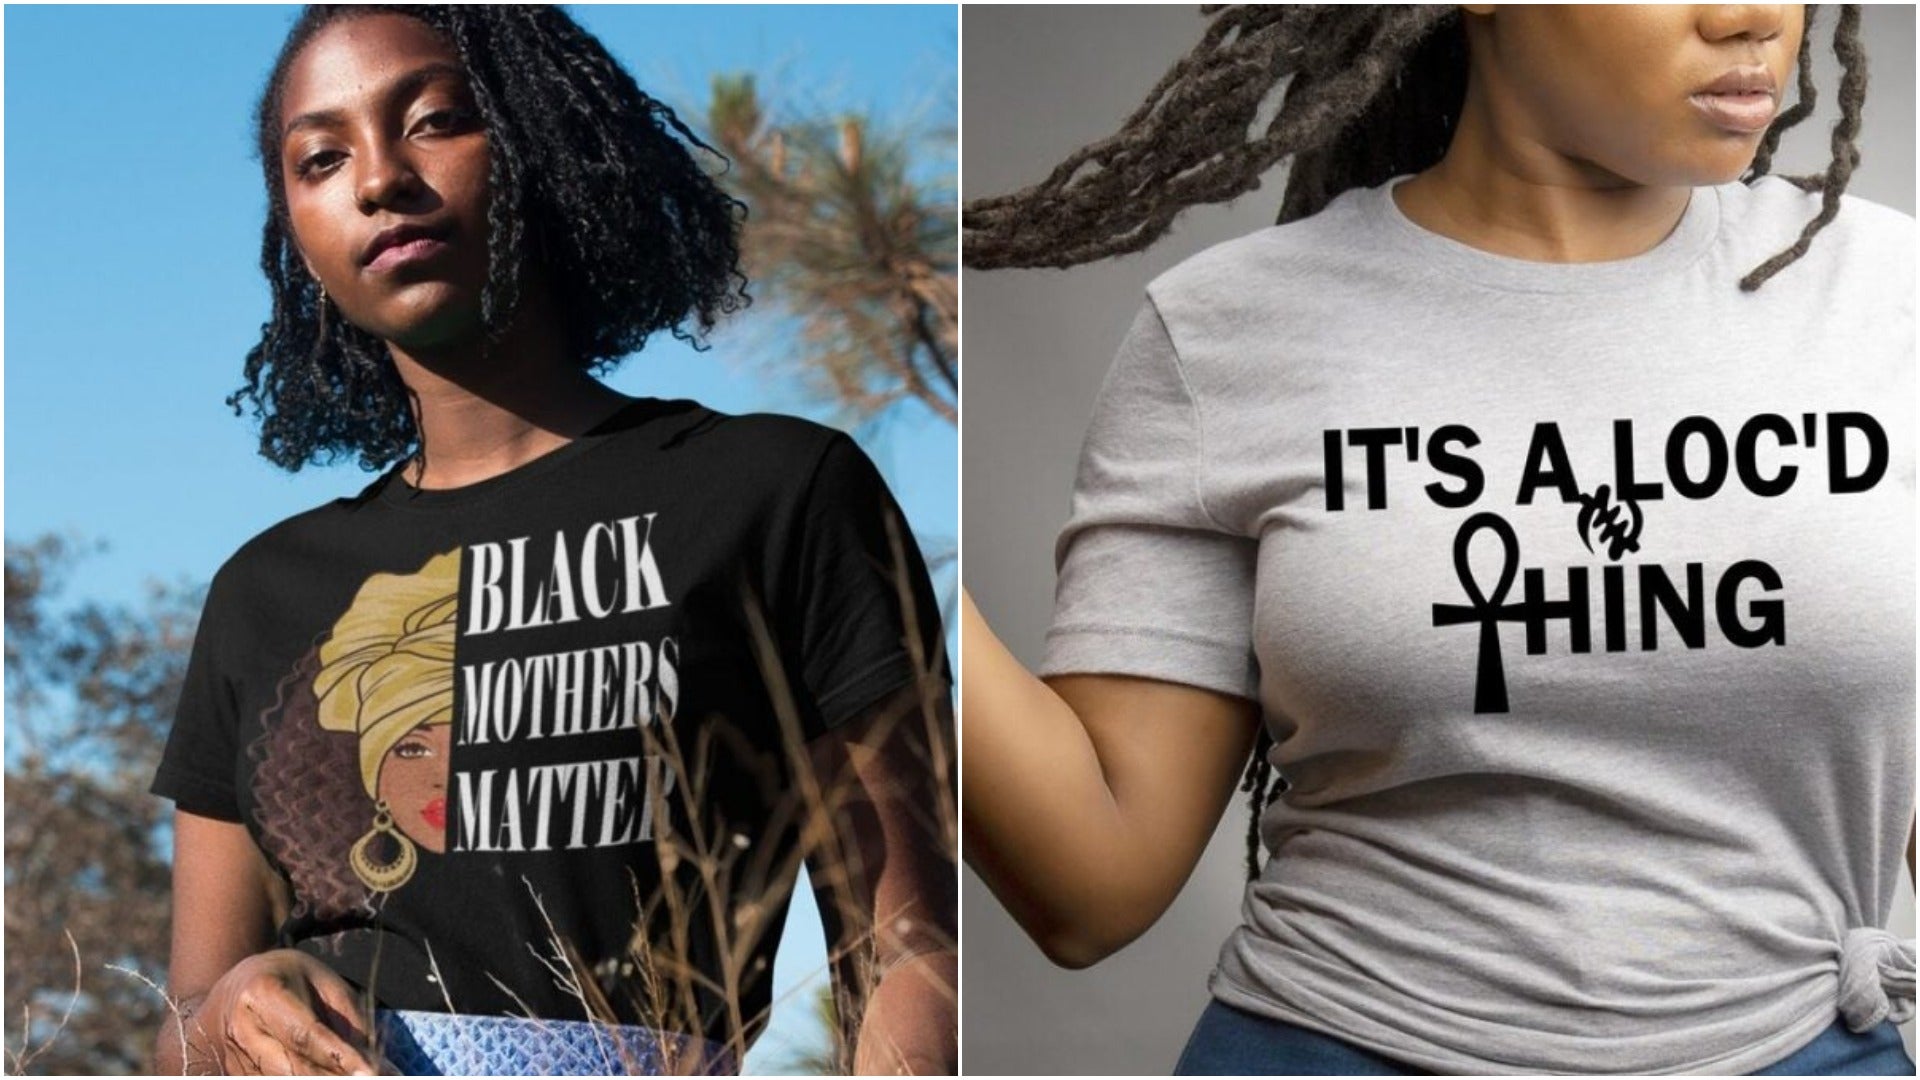 Say It Loud! Embrace Your Blackness With These Fun And Empowering Graphic Tees